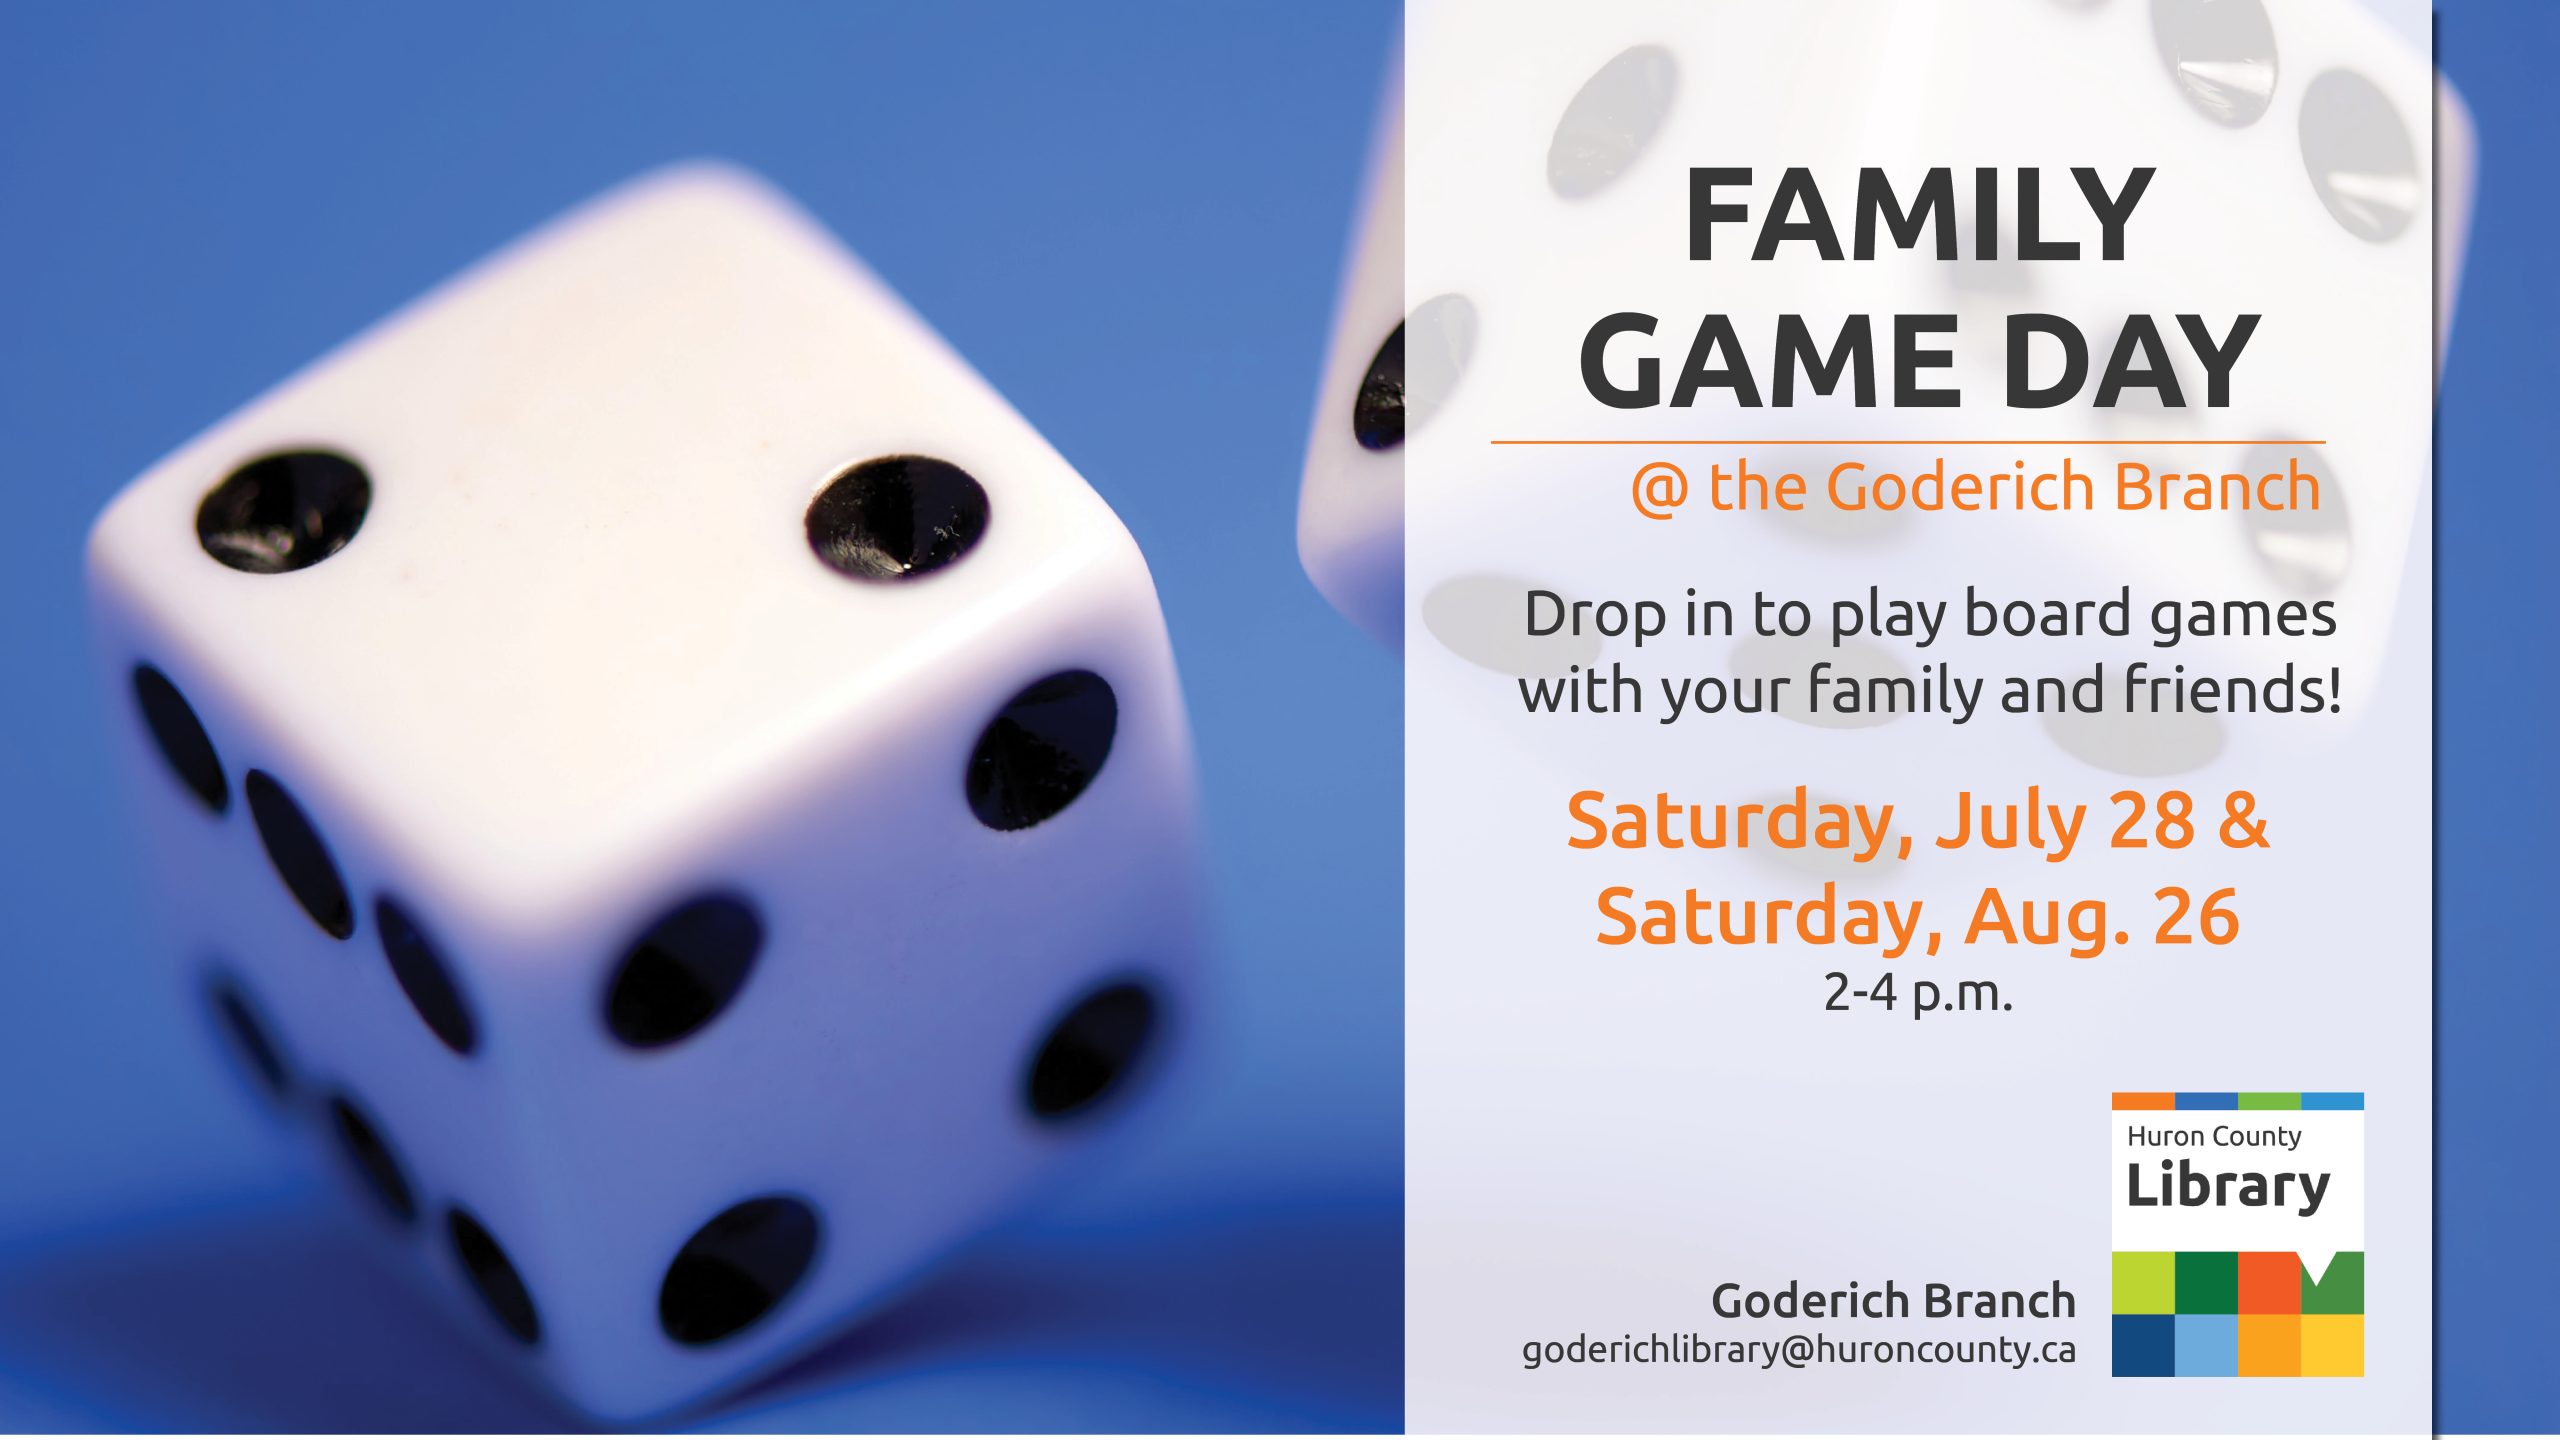 Photo of a pair of dice with text promoting Family Game Day at Goderich Branch